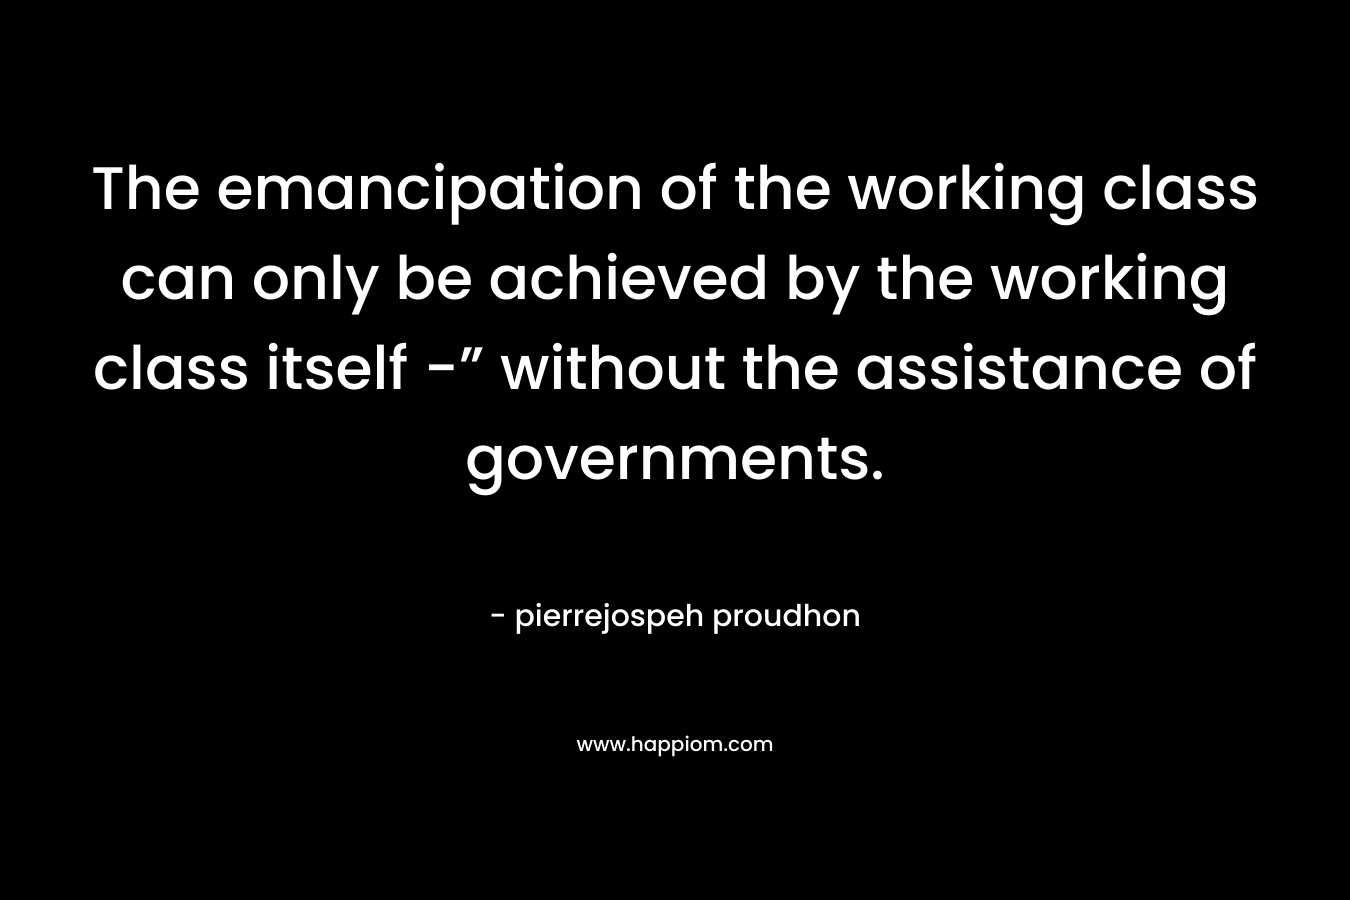 The emancipation of the working class can only be achieved by the working class itself -” without the assistance of governments. – pierrejospeh proudhon